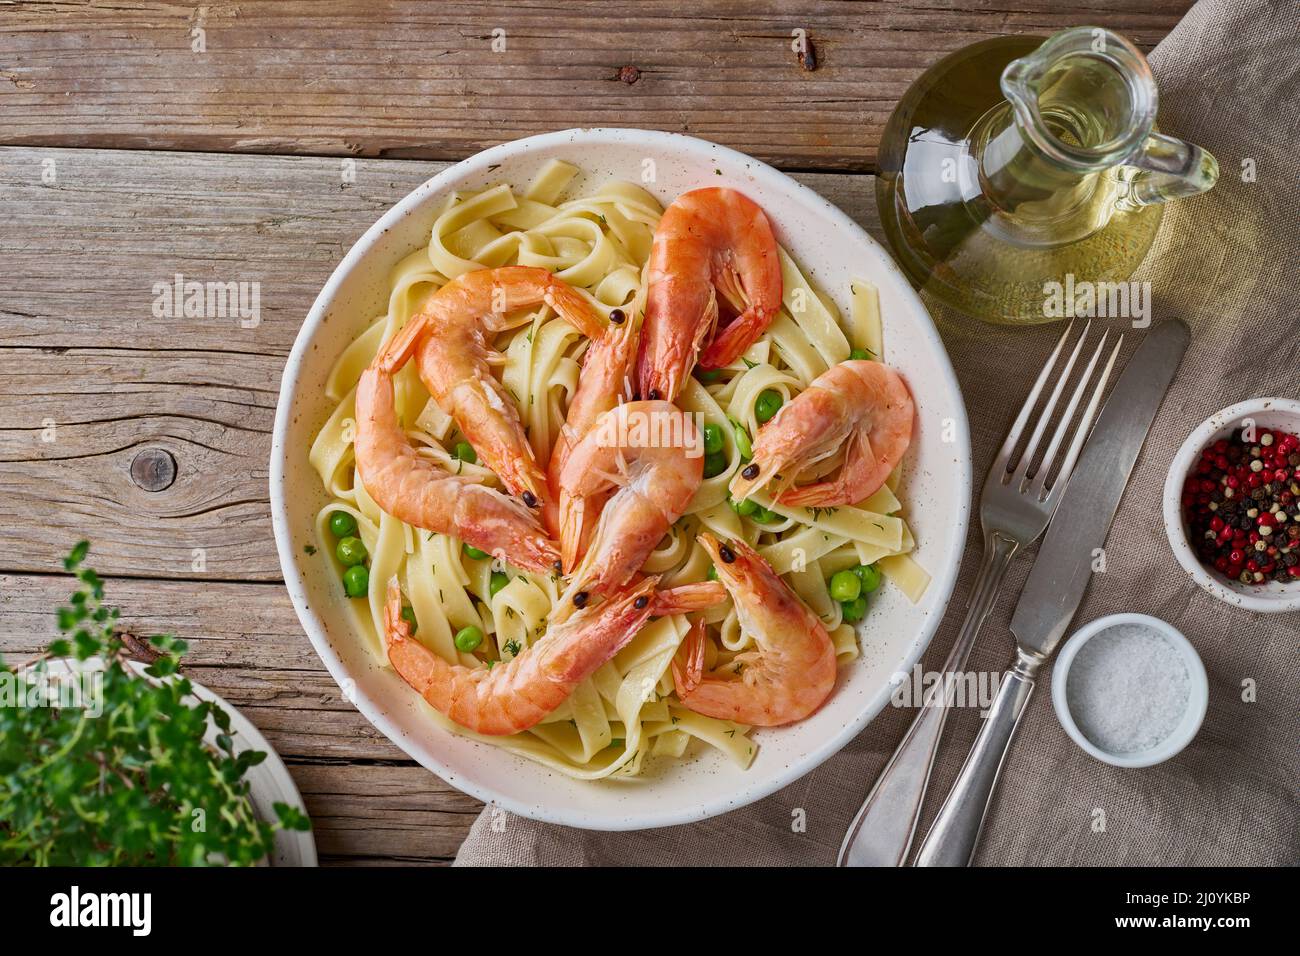 Shrimp, pasta tagliatelle, green peas, dill. White plate on old rustic wooden table Stock Photo